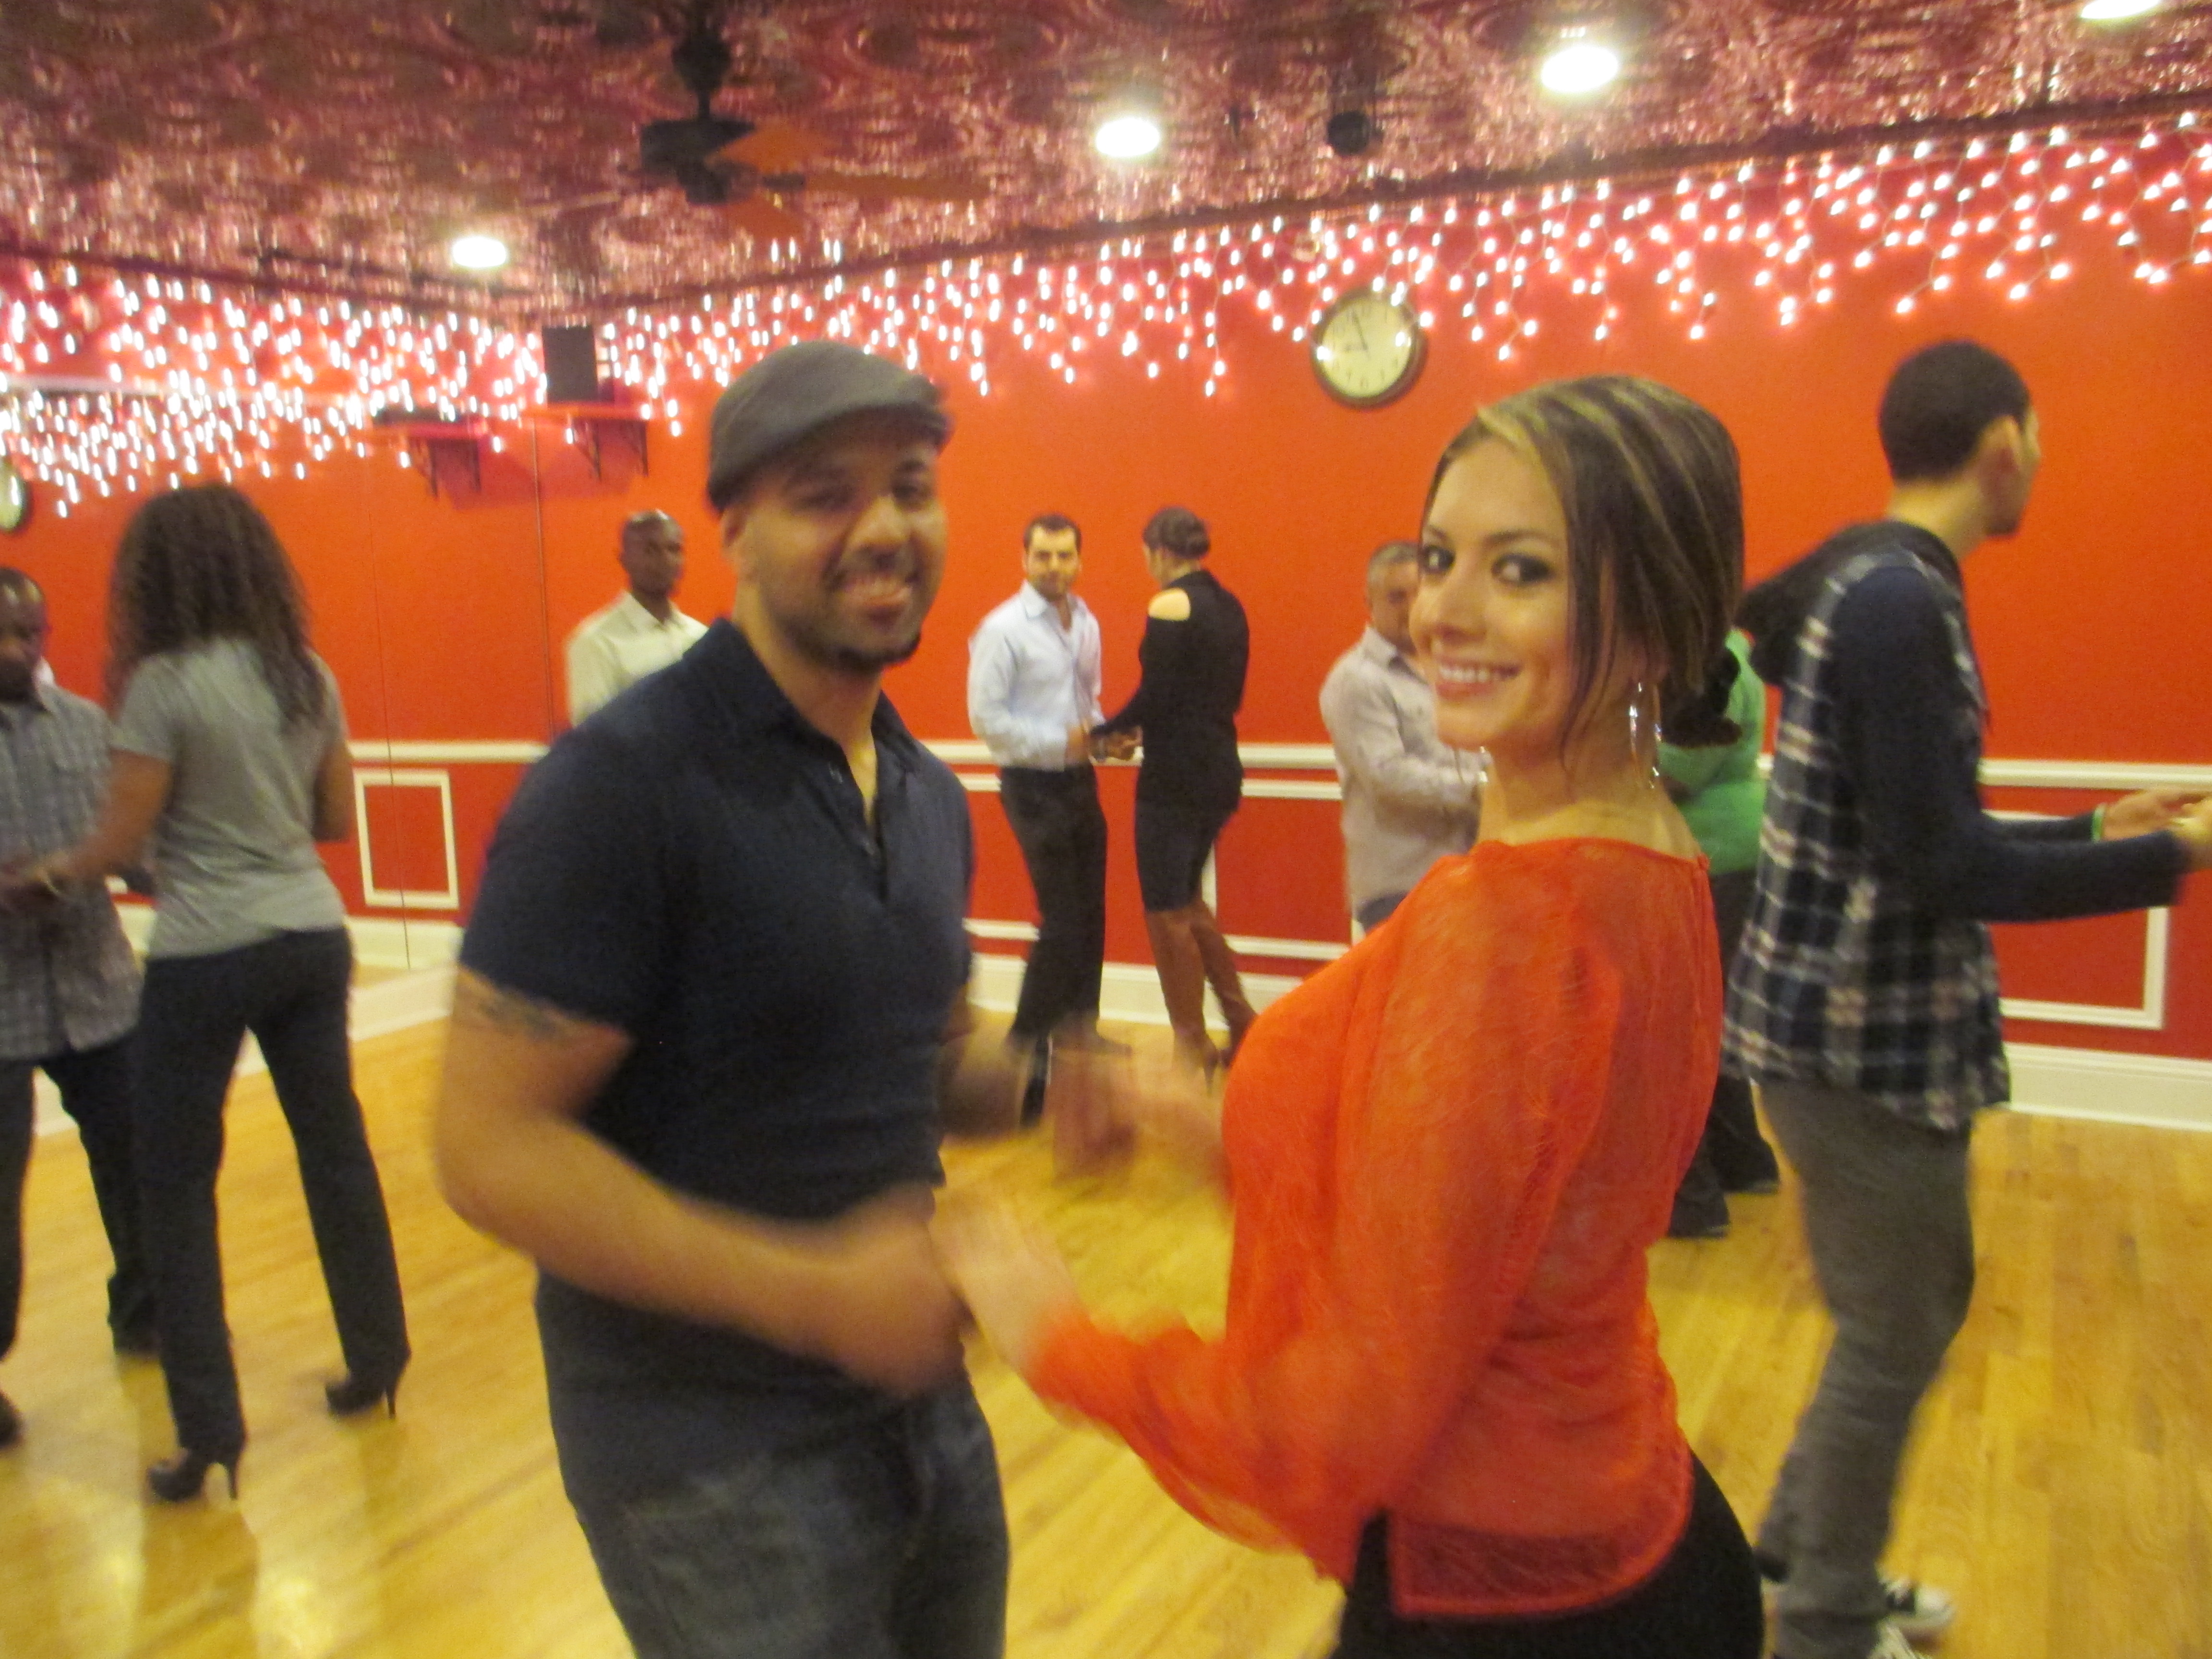 Salsa Dance Classes in Brooklyn for FREE